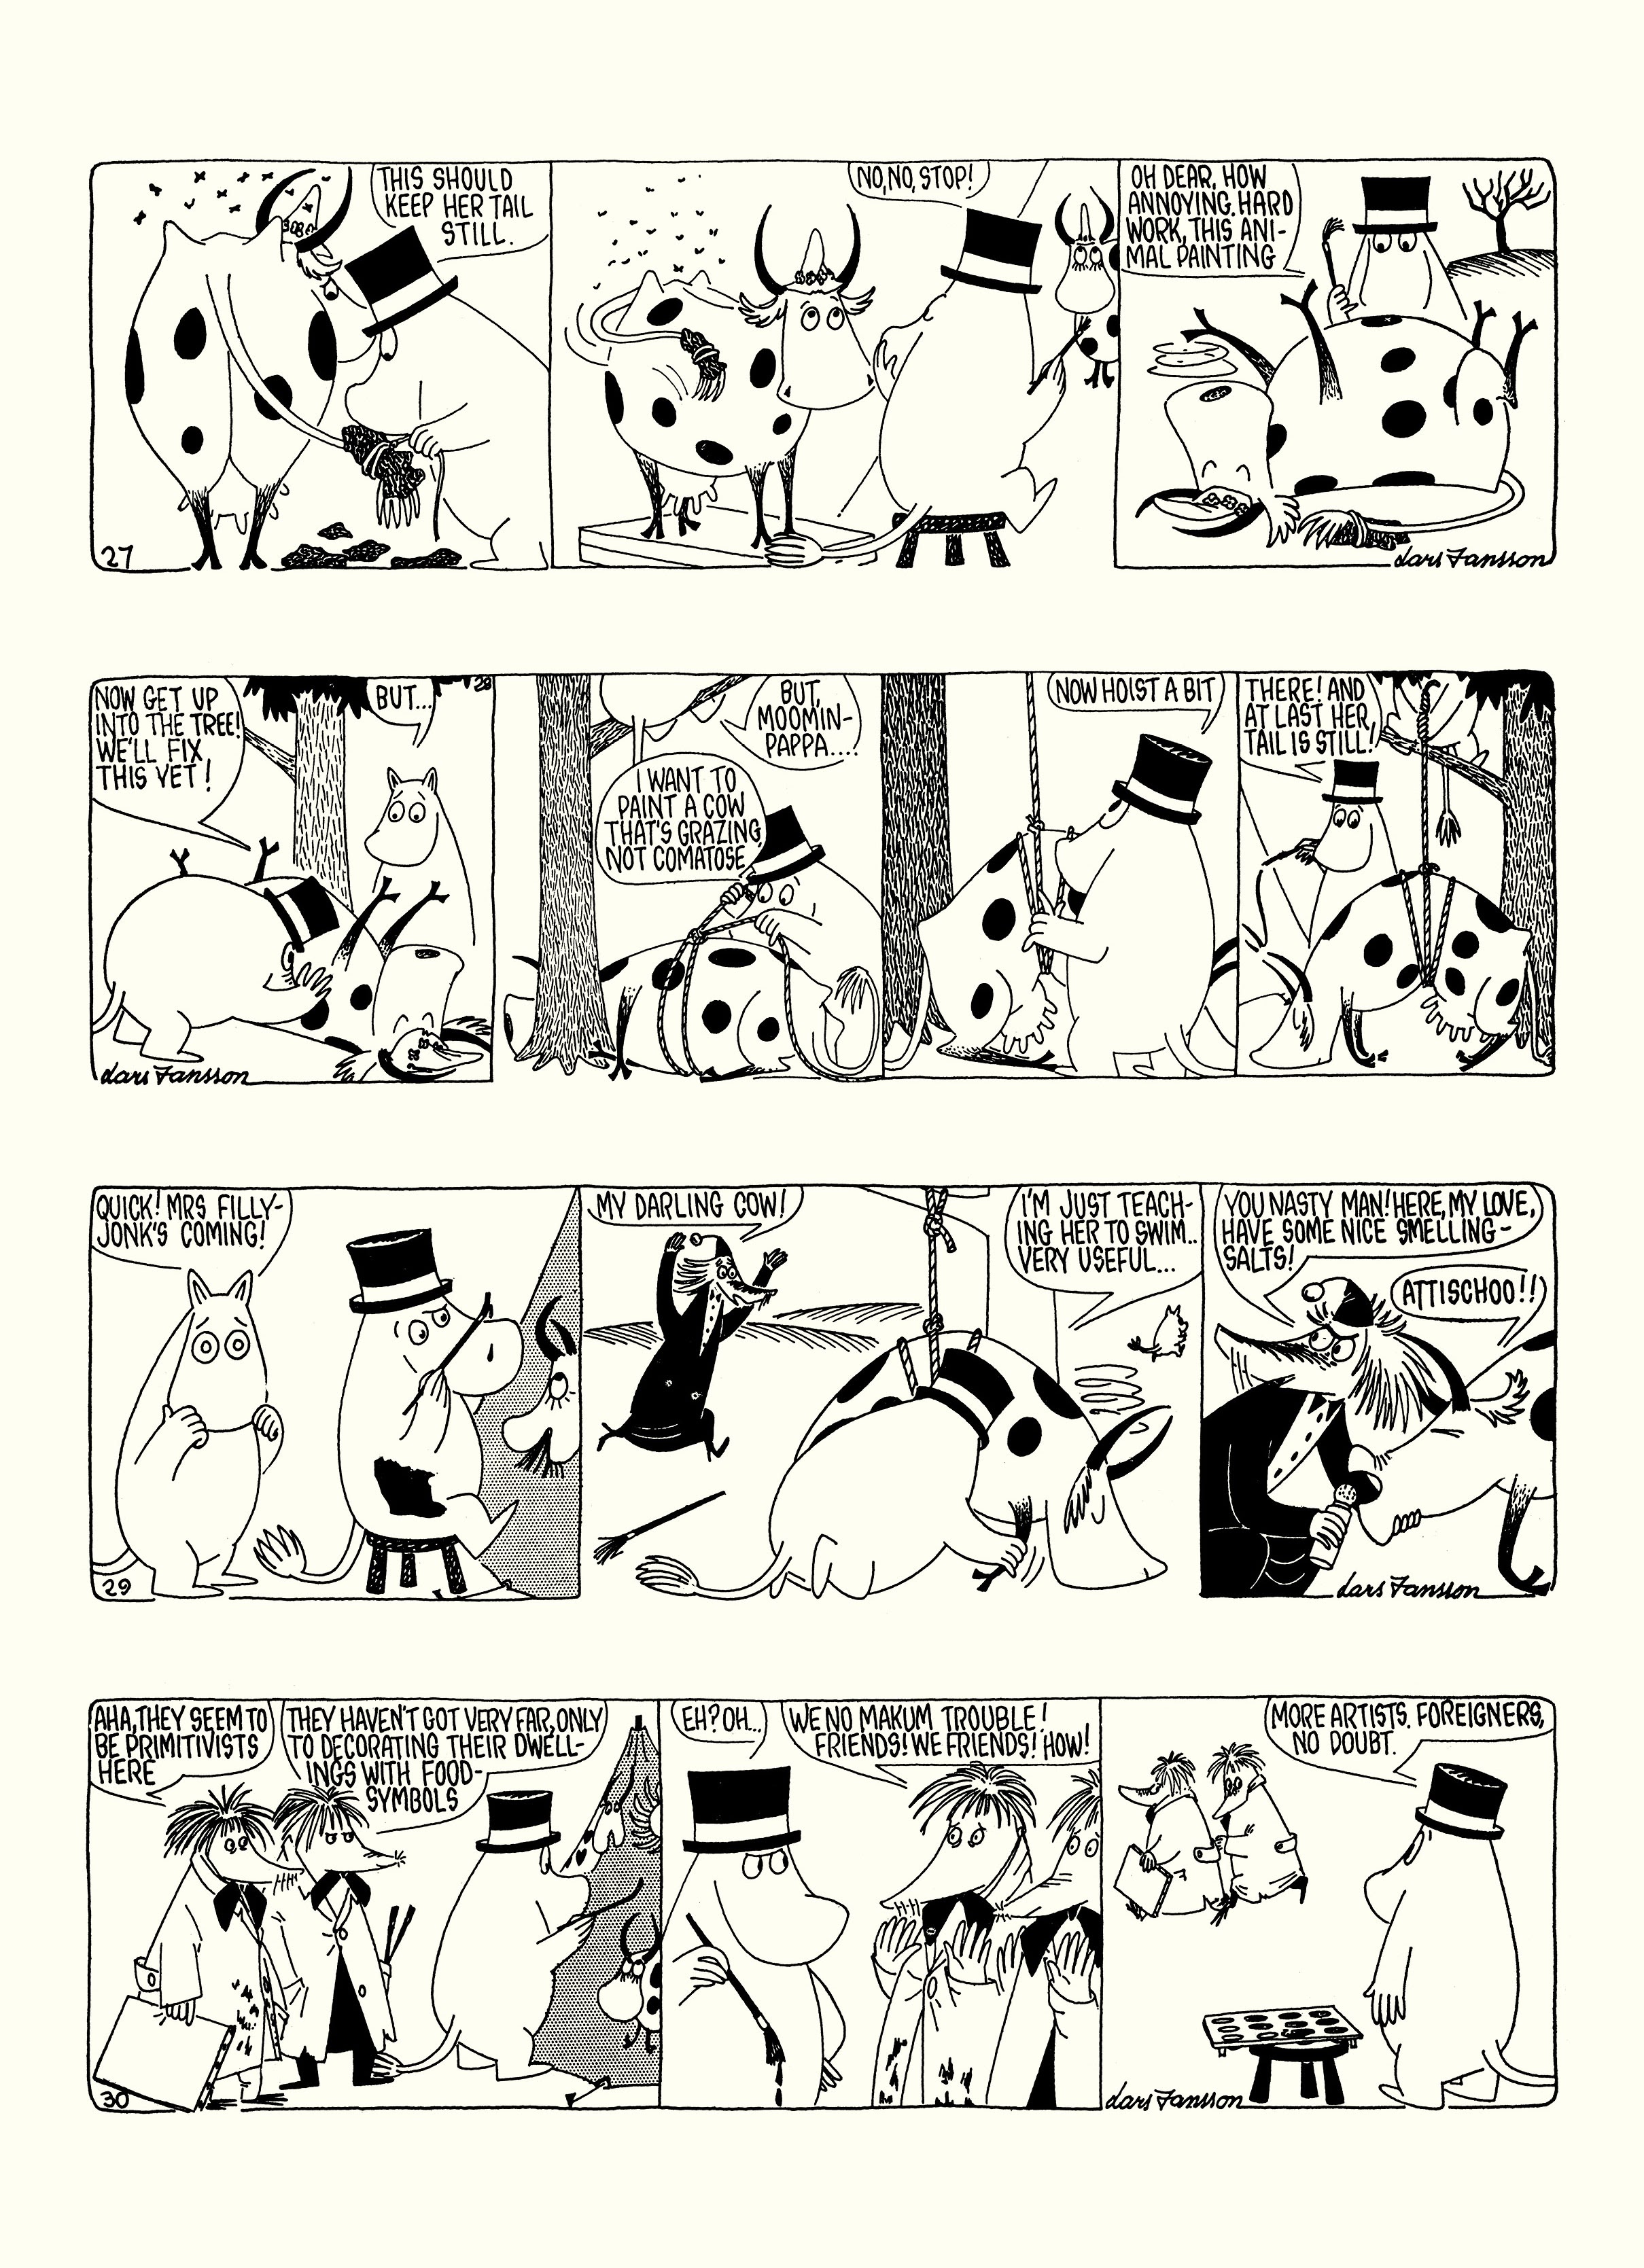 Read online Moomin: The Complete Lars Jansson Comic Strip comic -  Issue # TPB 8 - 34